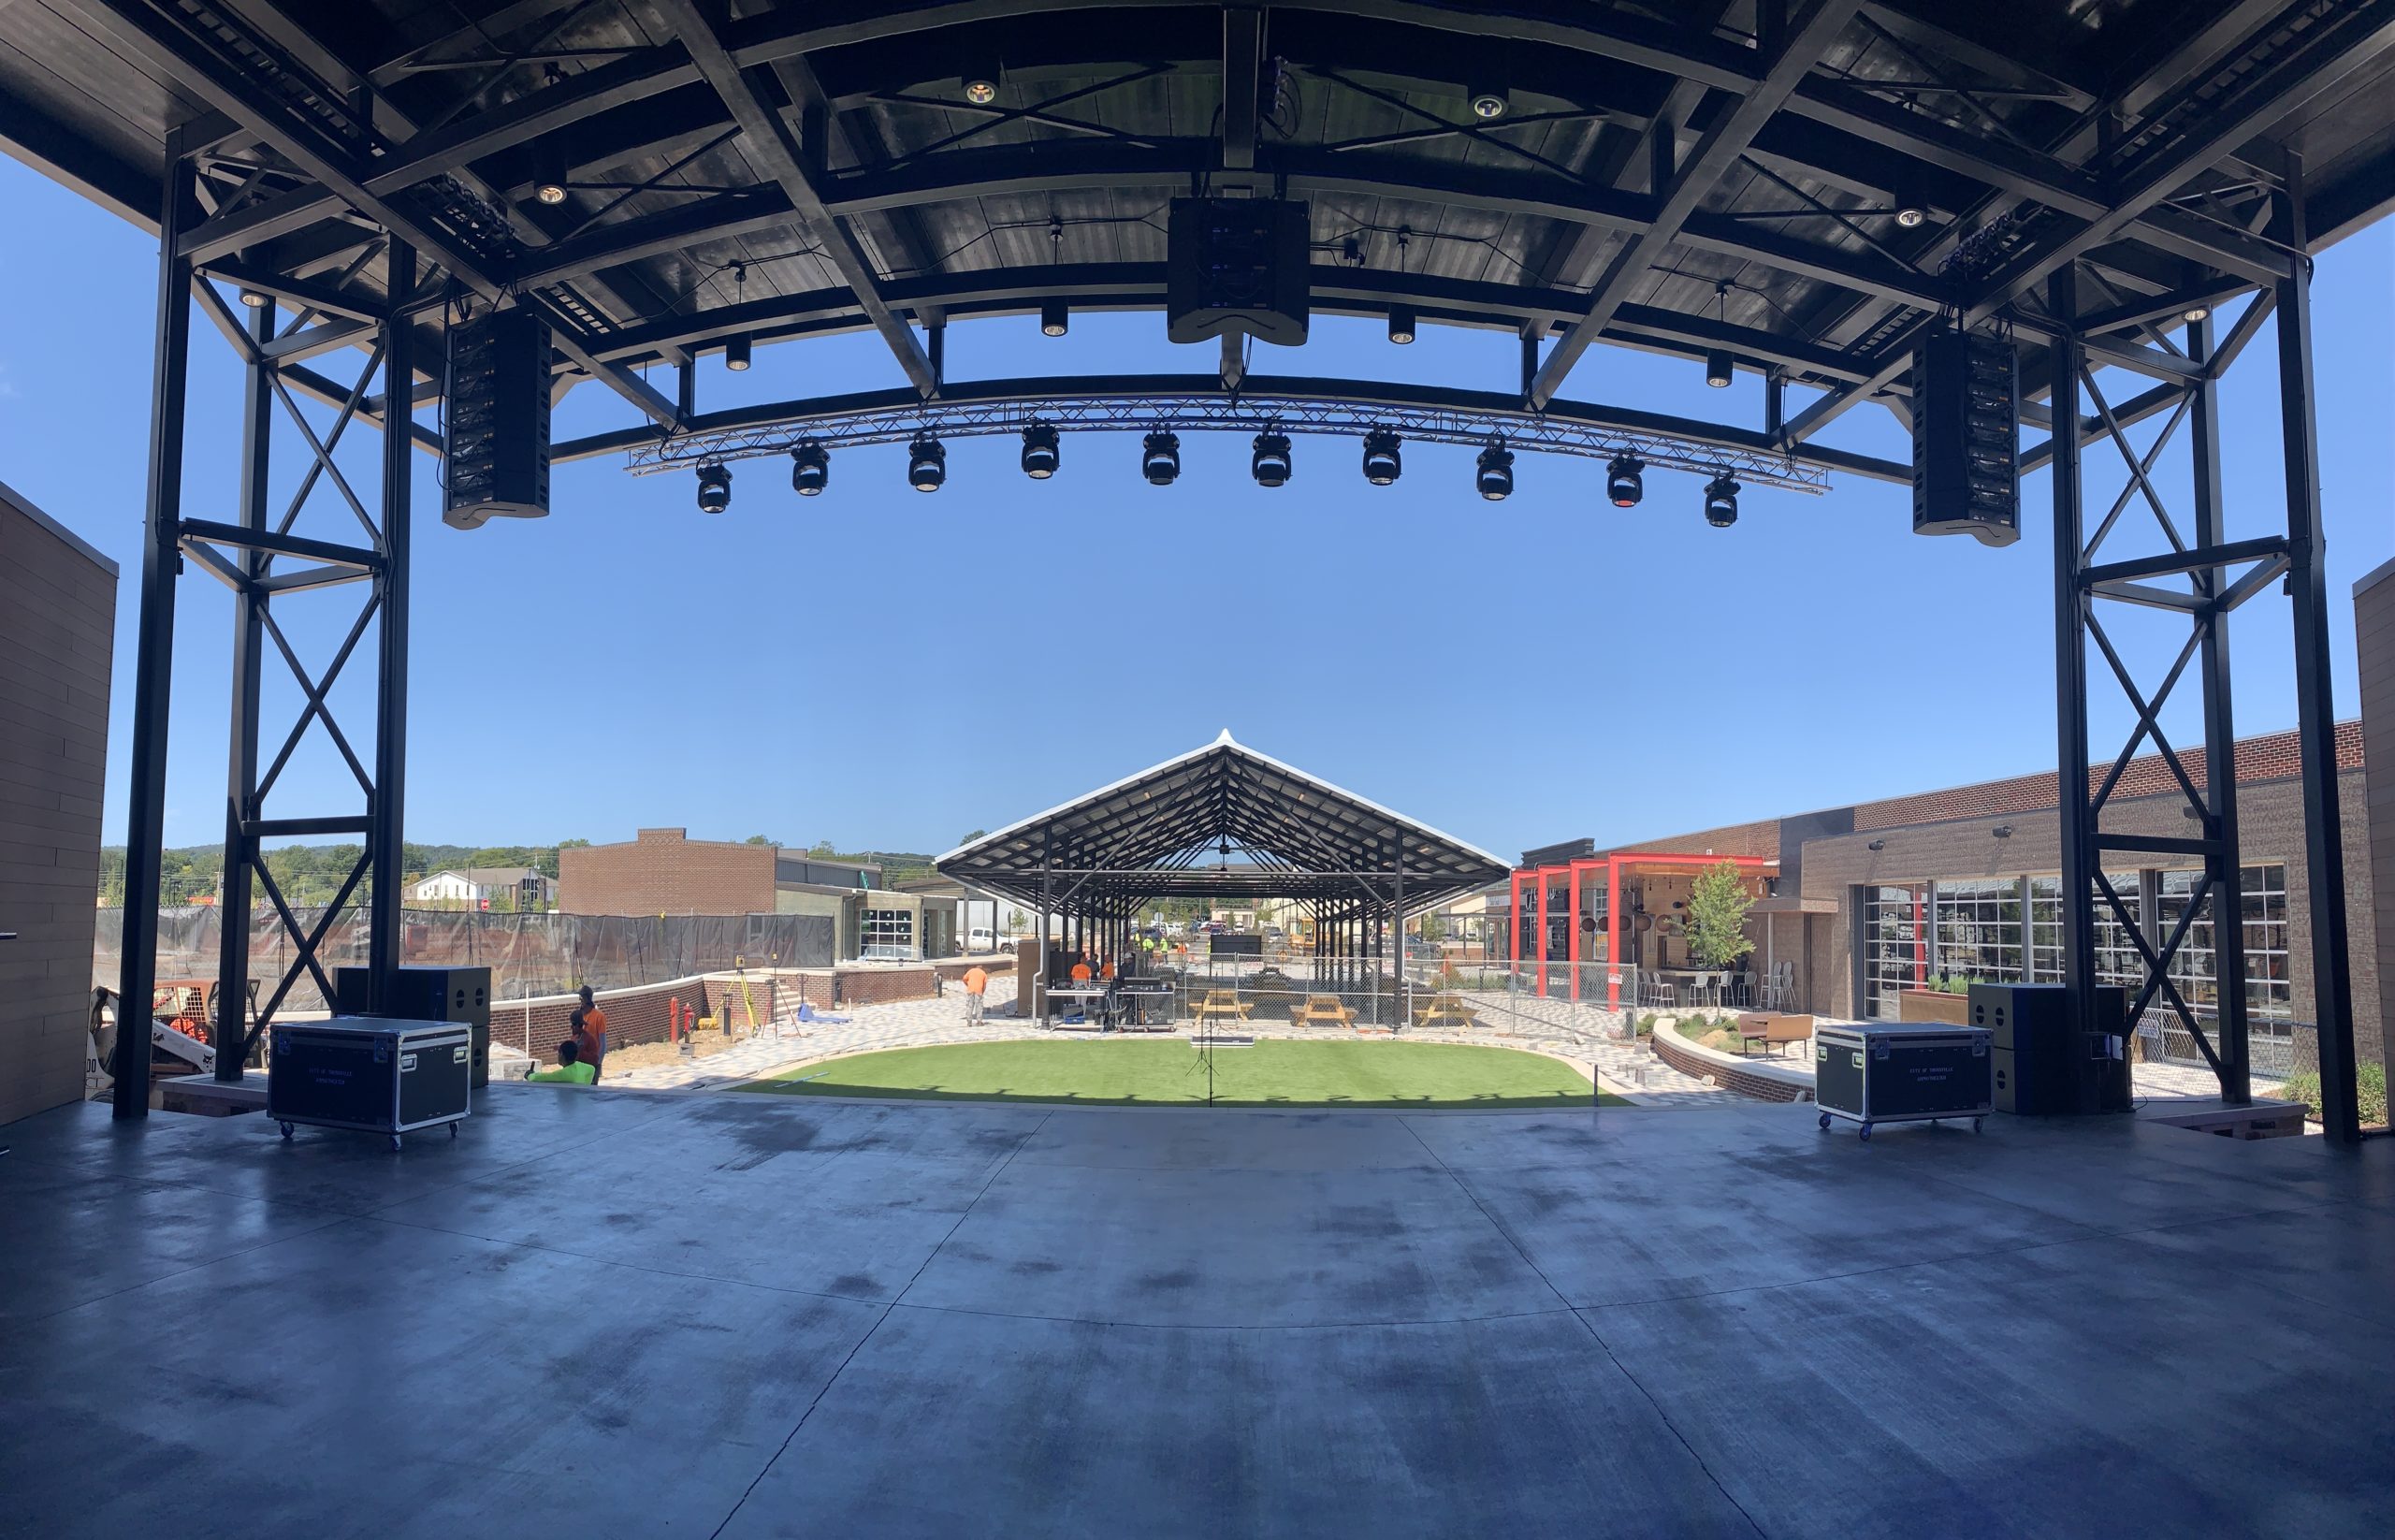 EAW® TAKES CENTER STAGE AT TRUSSVILLE'S NEW DOWNTOWN ENTERTAINMENT